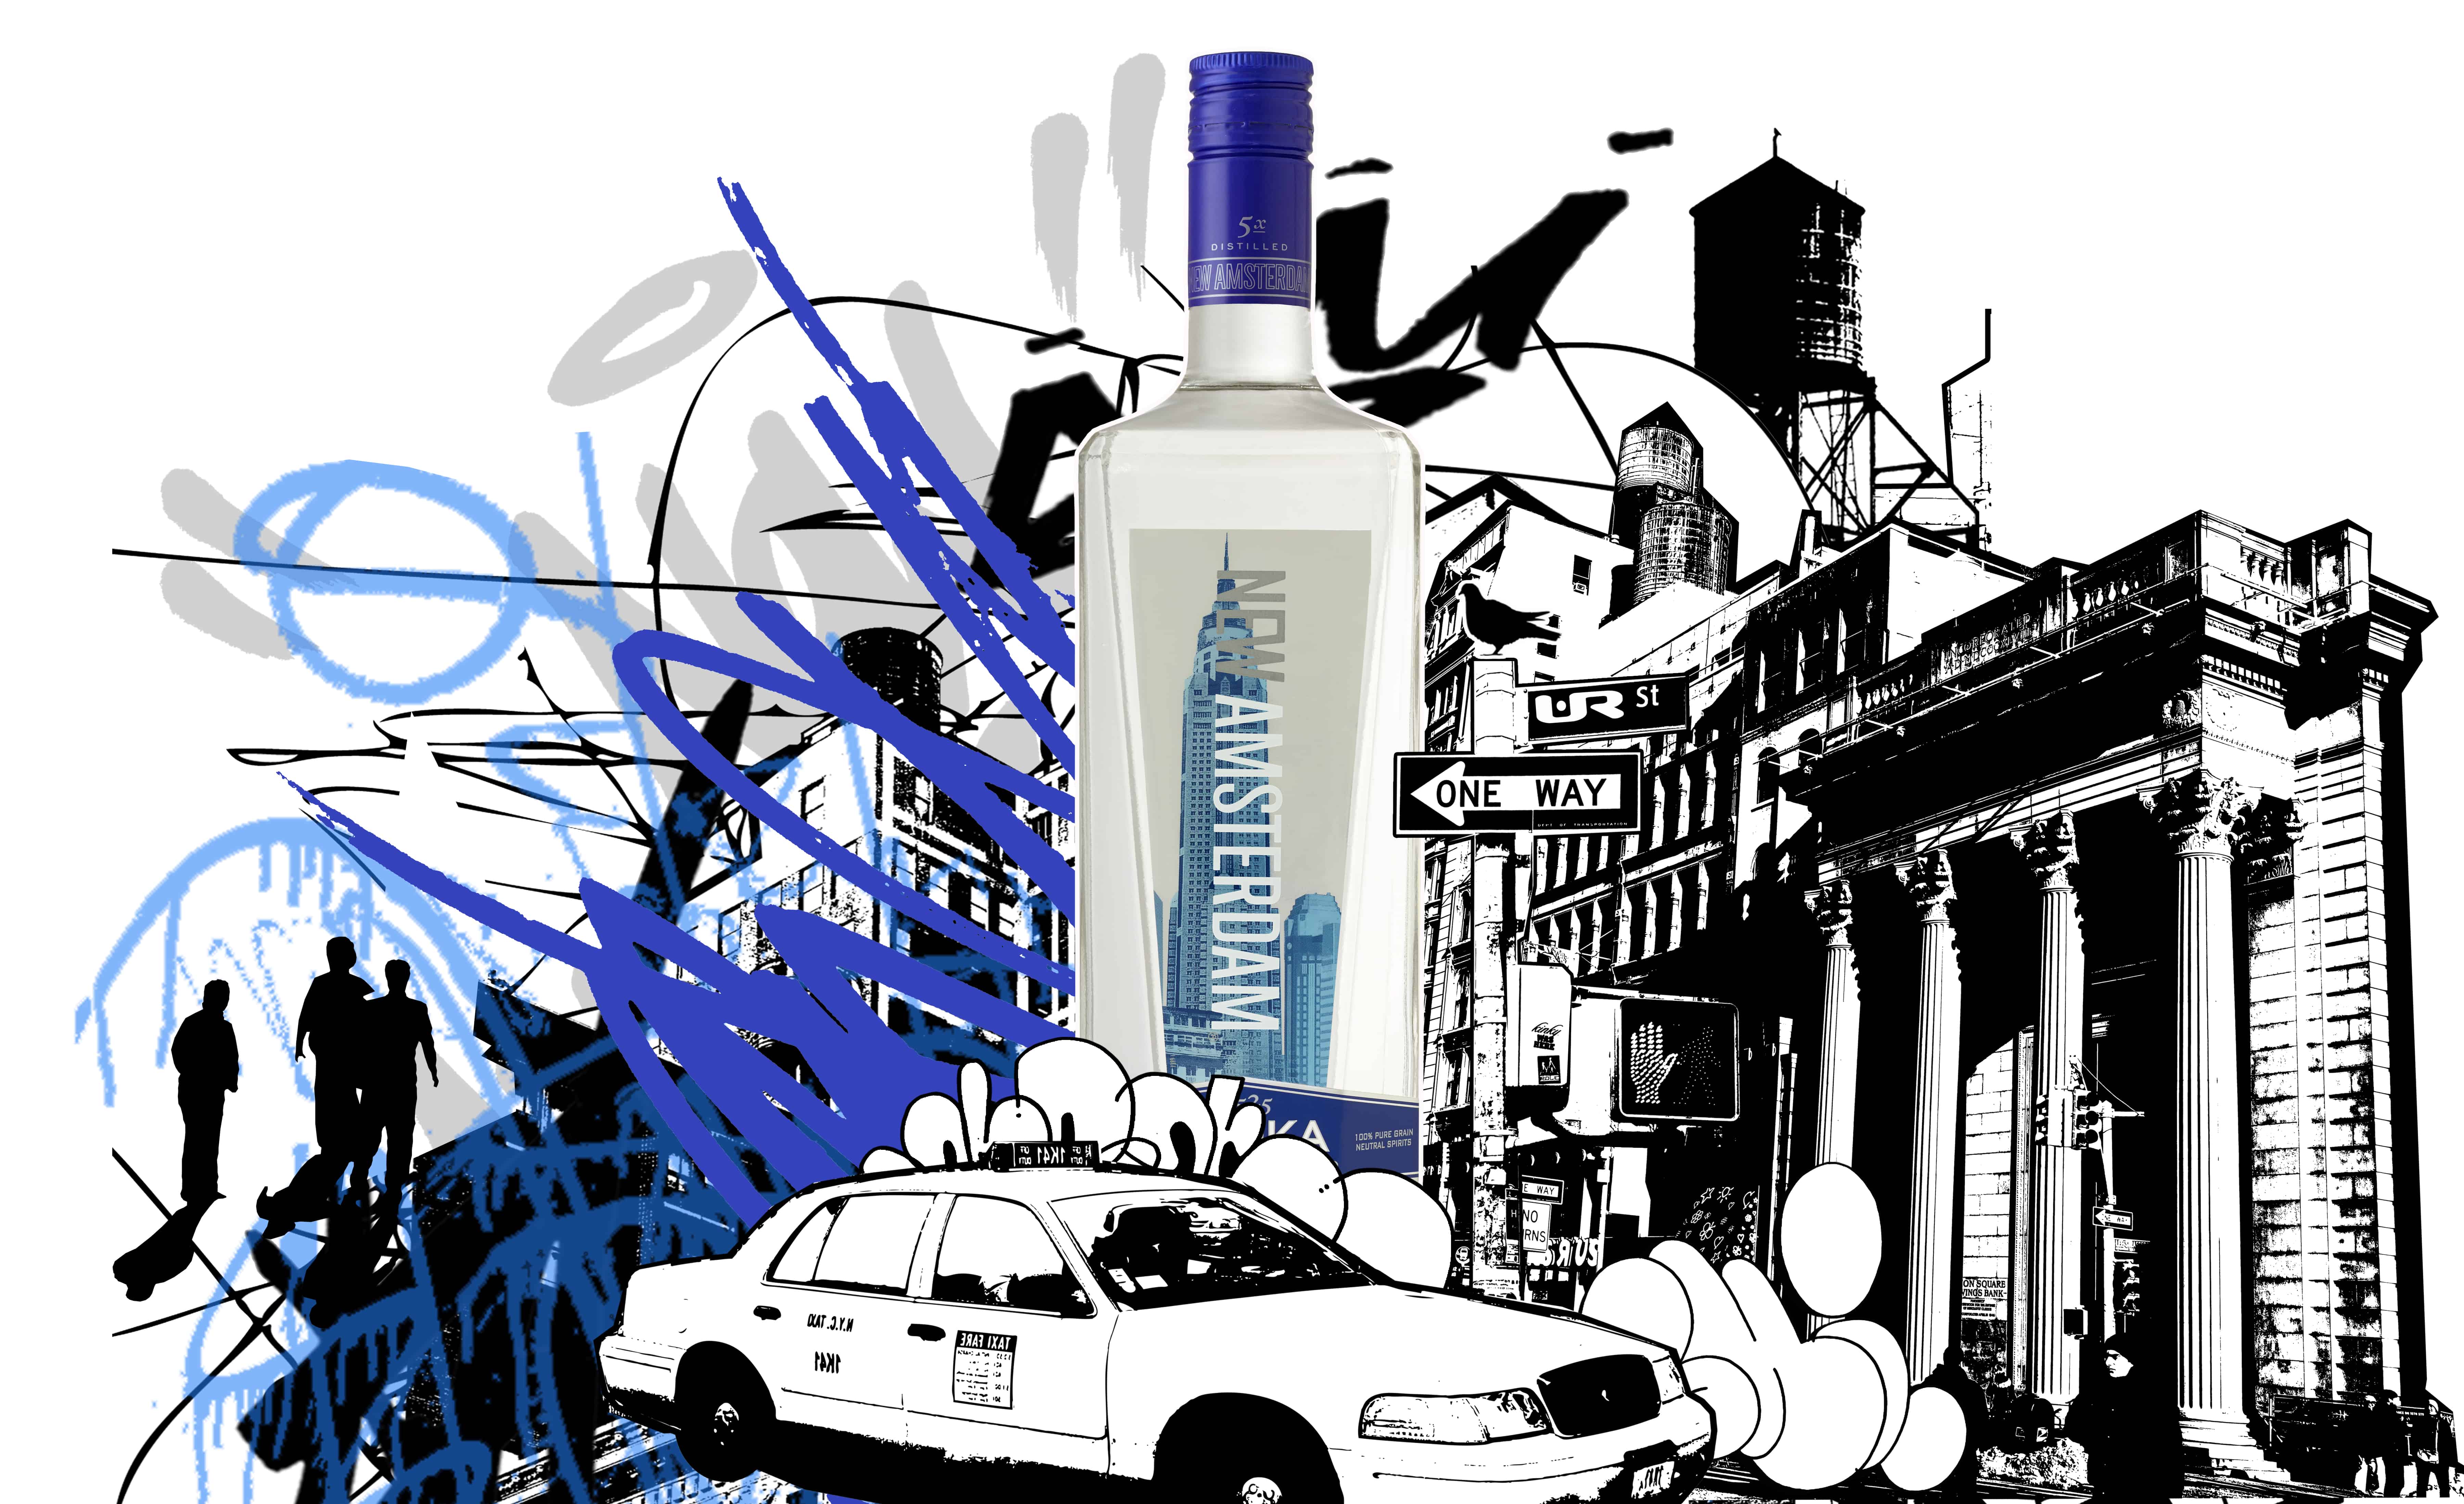 New Amsterdam Vodka "It's Your Town" MAN'edged Mag with work by UR New York